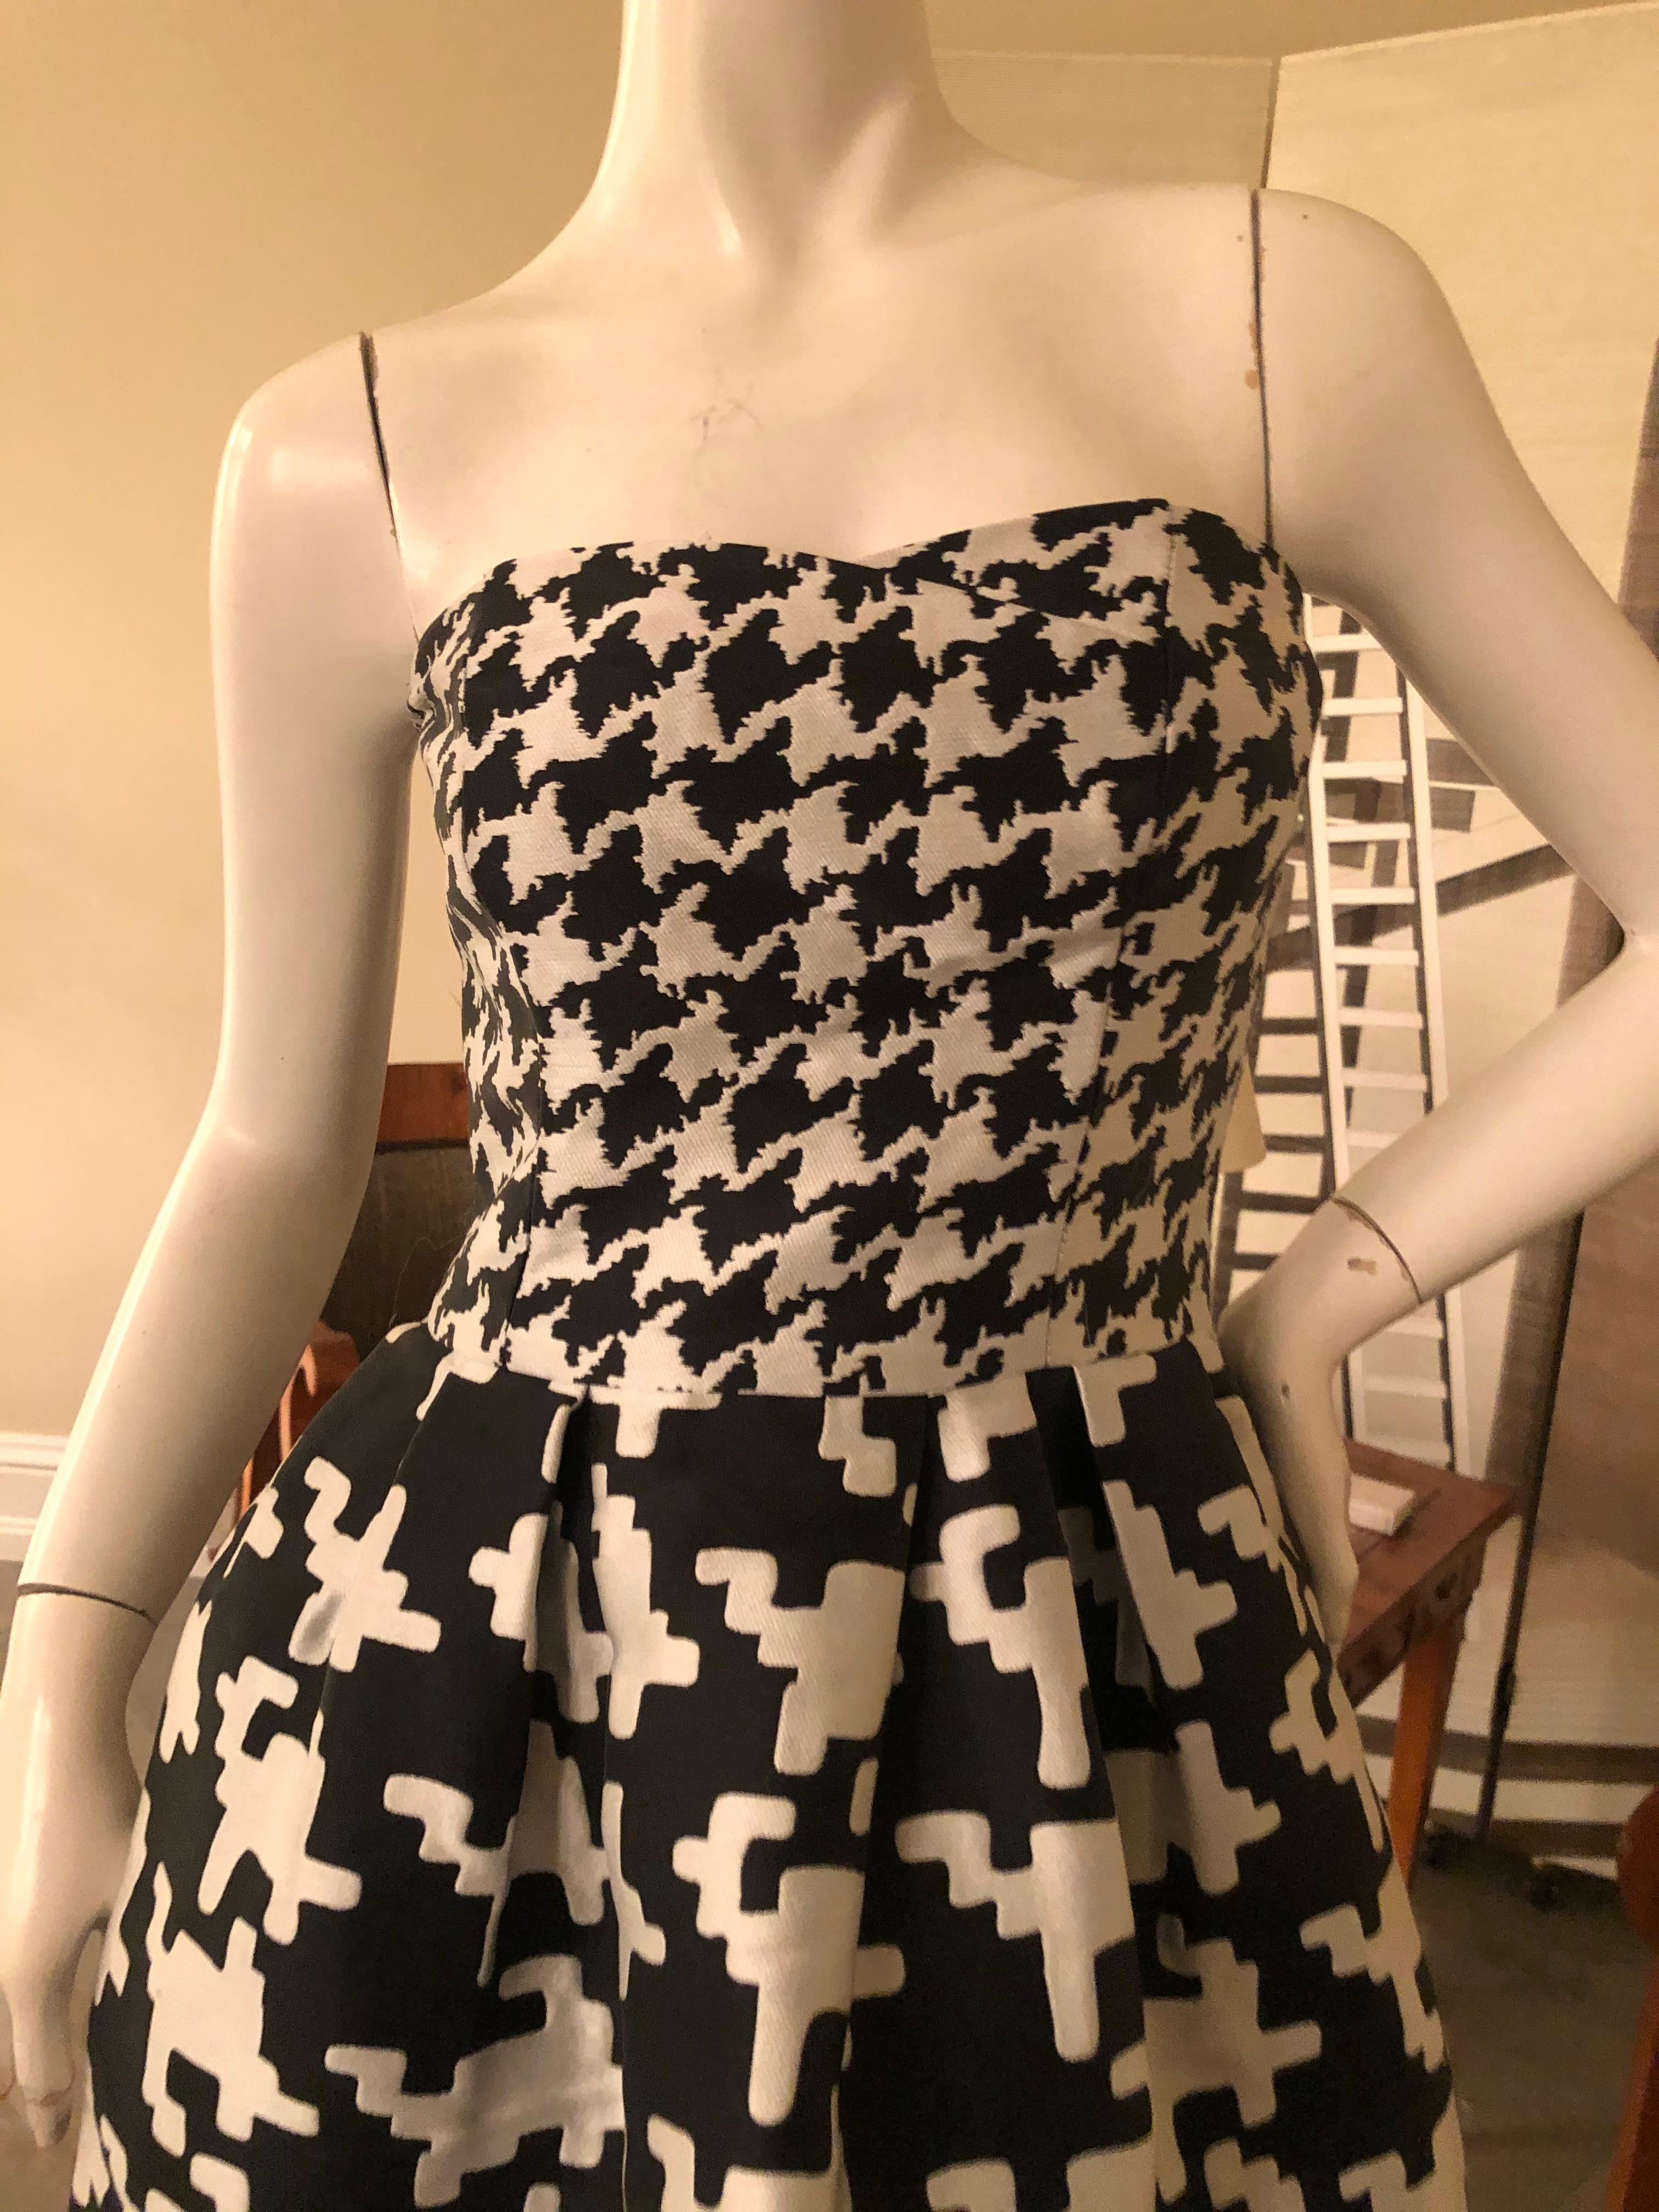 Moschino Strapless Exaggerated Houndstooth Corset Dress In Excellent Condition For Sale In Cloverdale, CA